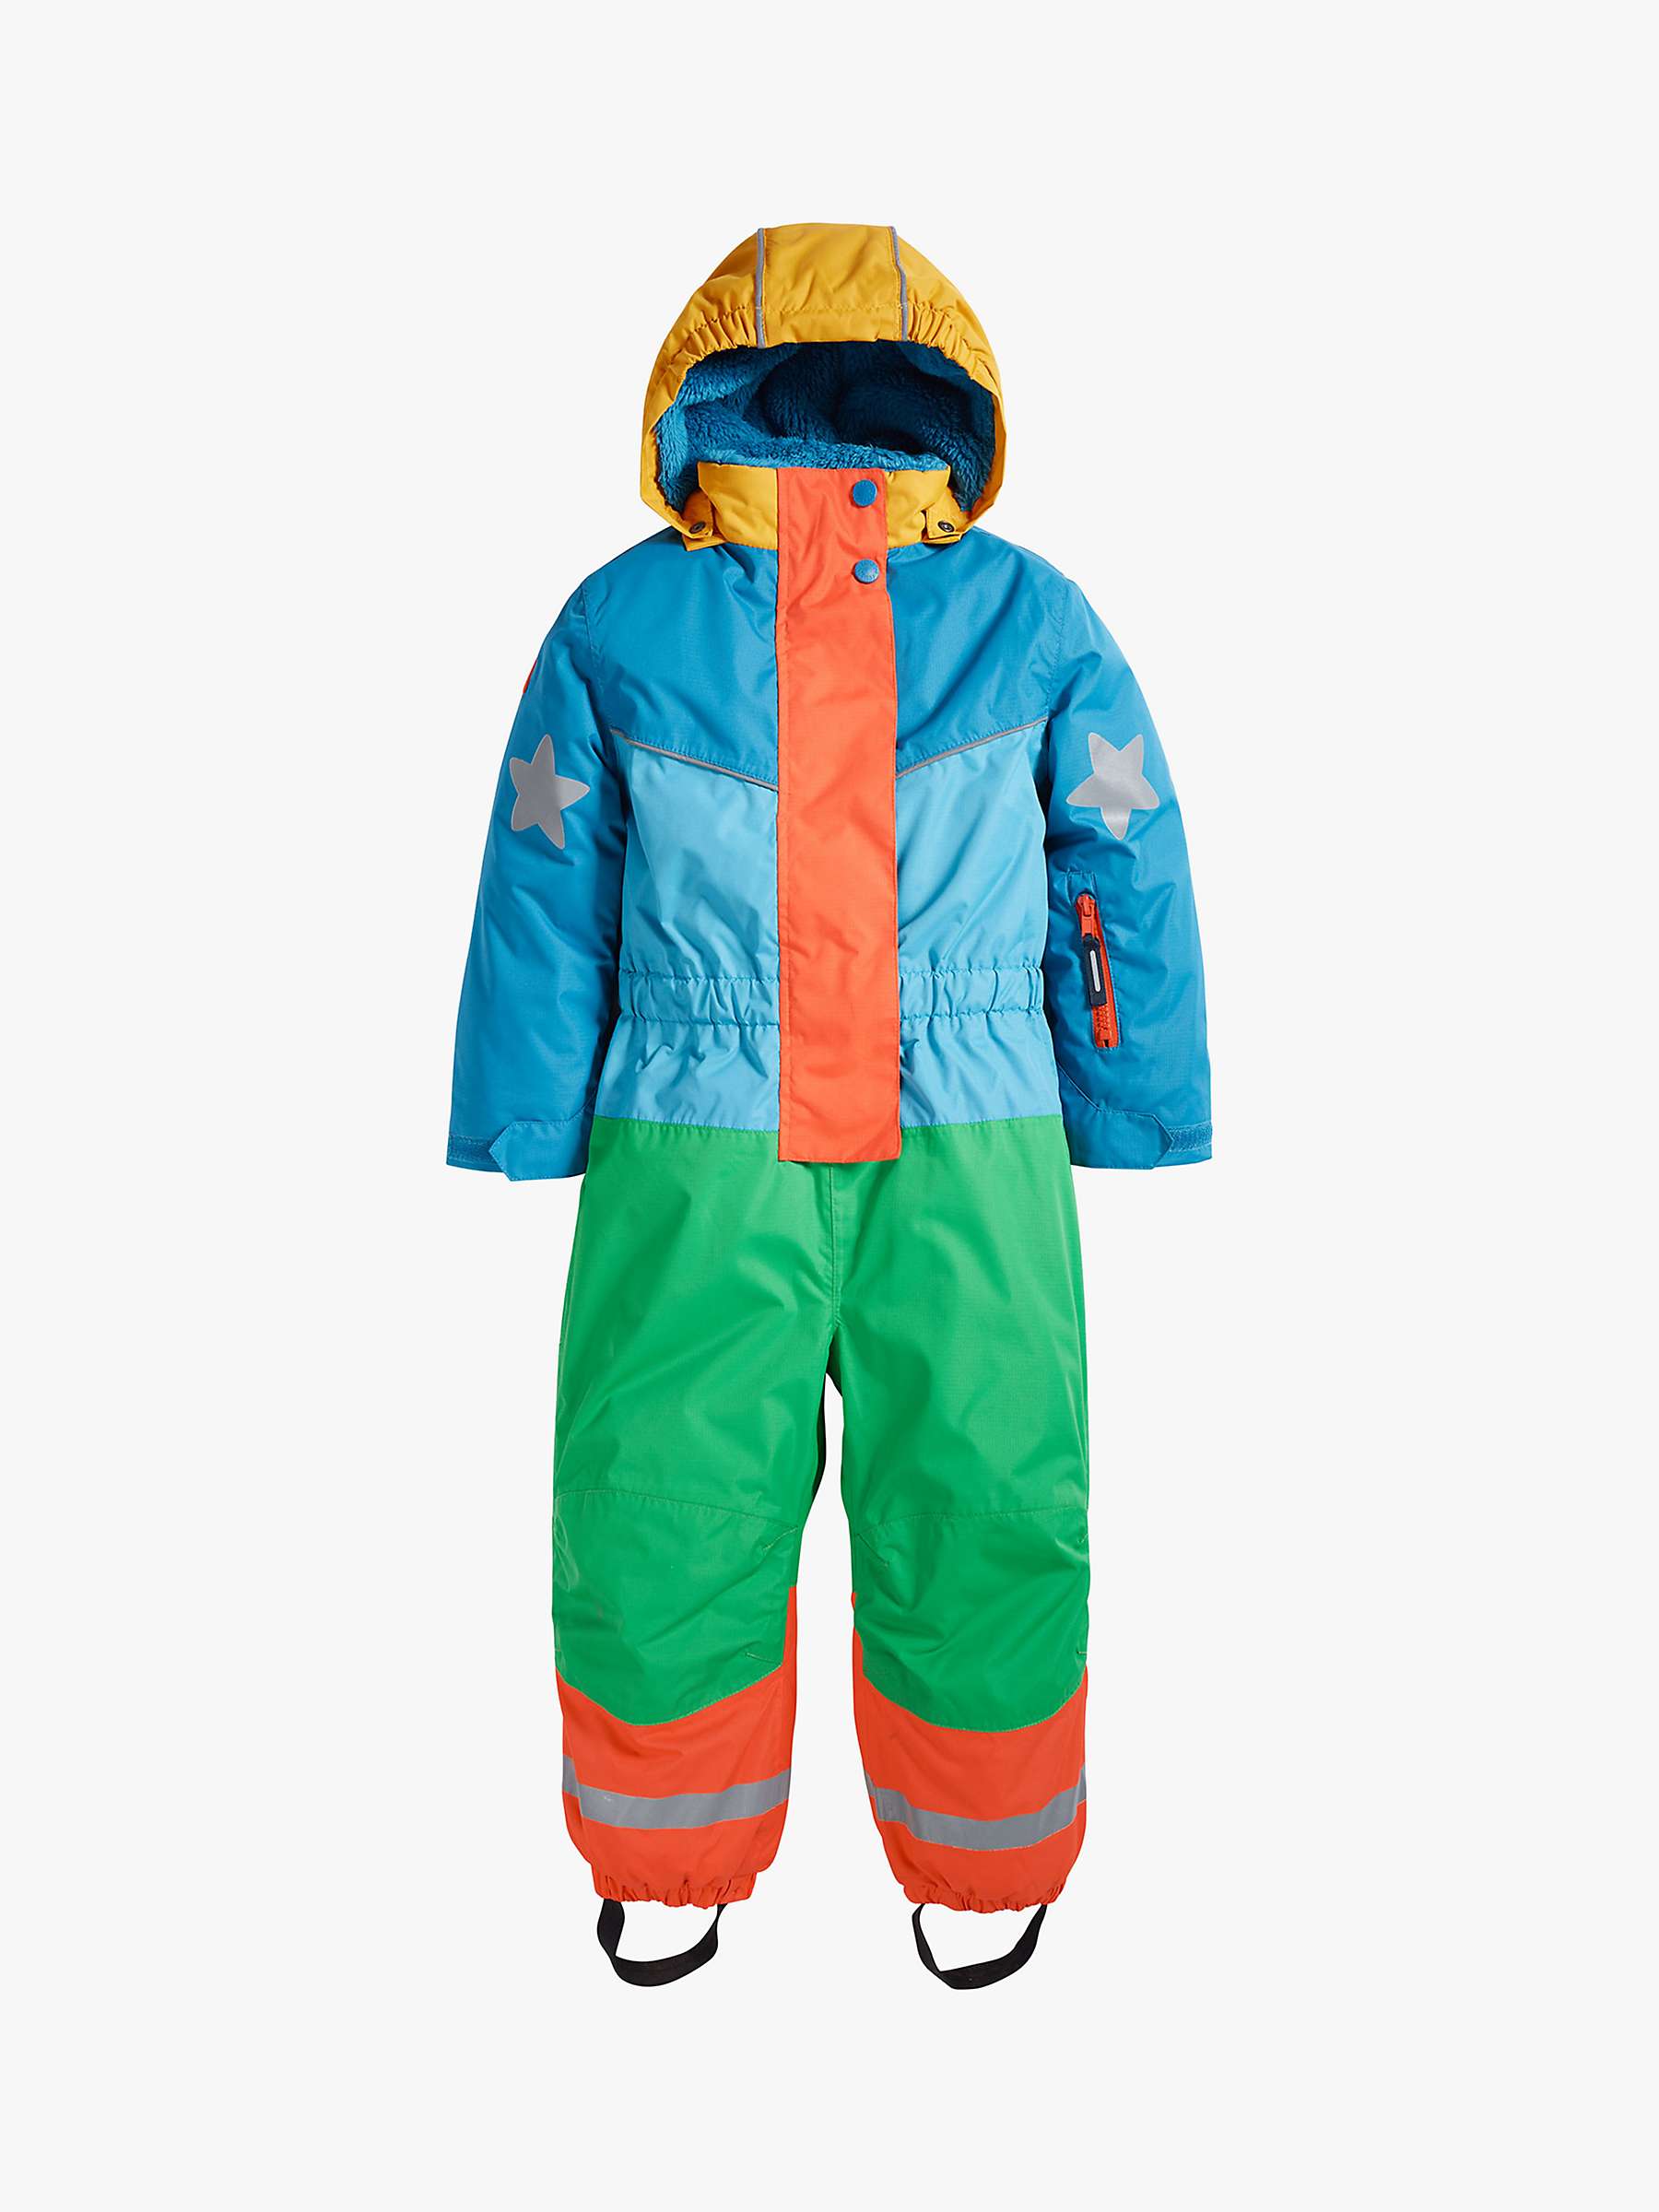 Buy Frugi Kids' Any Weather All in One Outwear, Chunky Rainbow Stripe Online at johnlewis.com